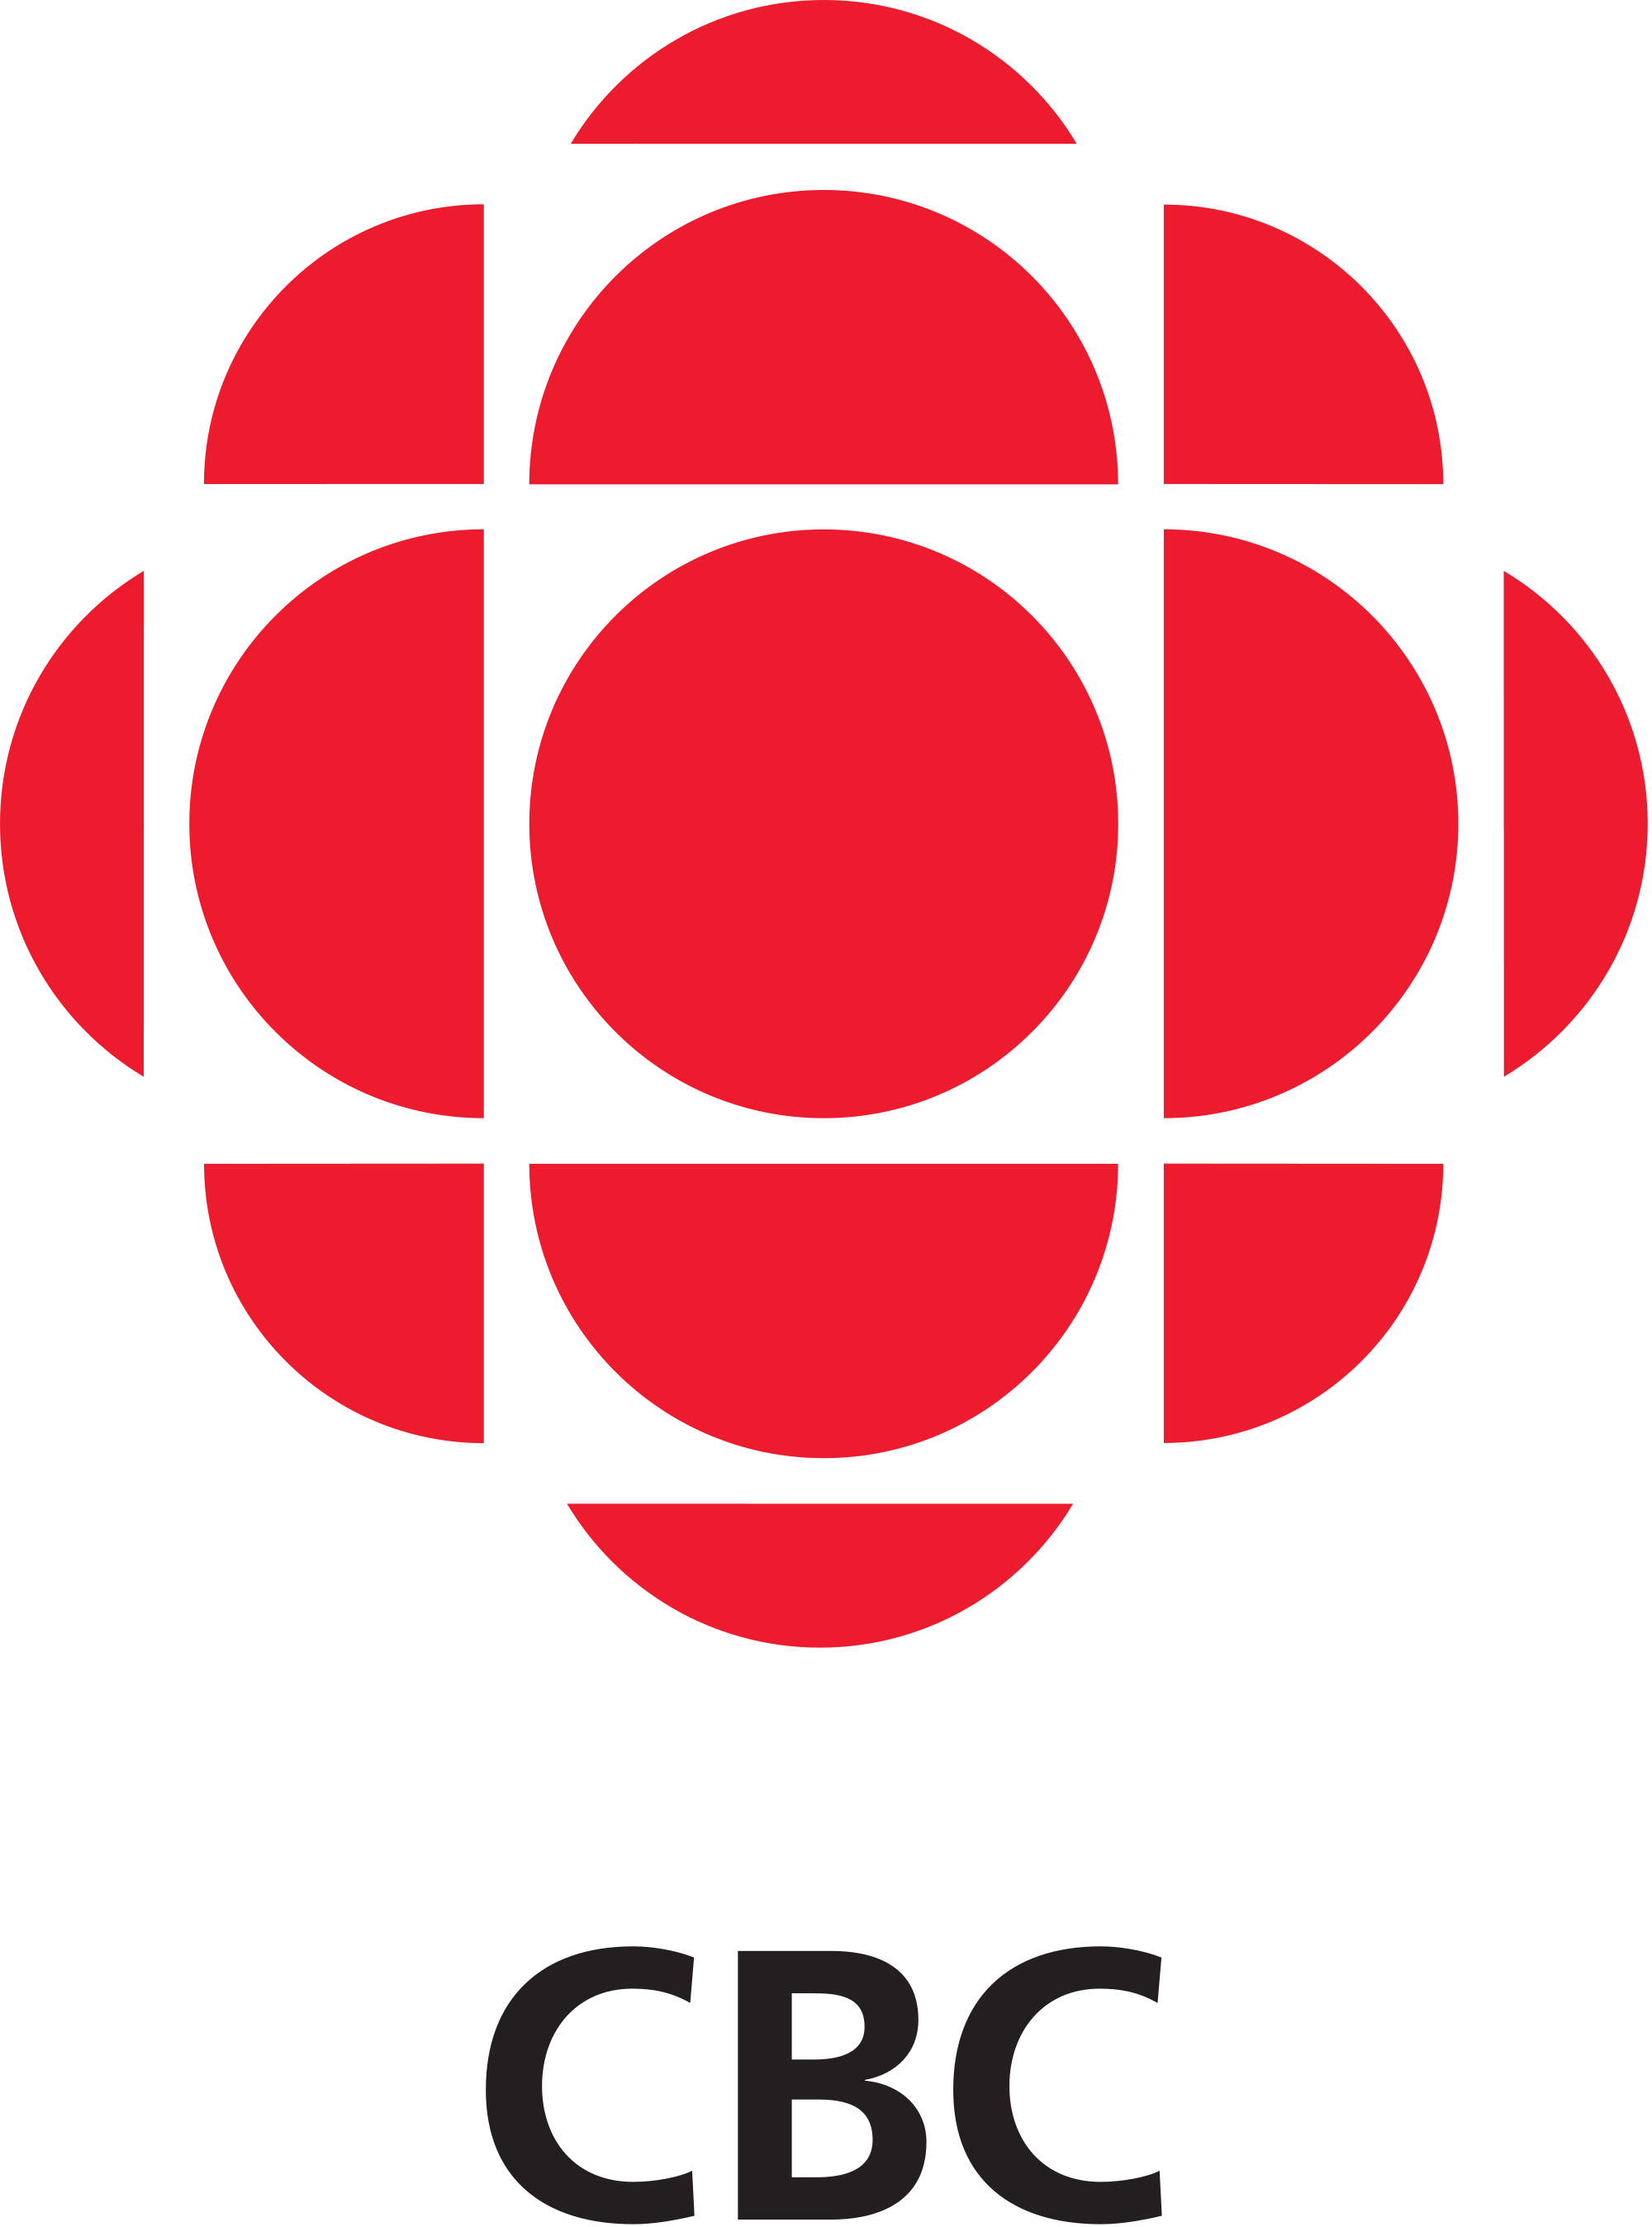 Canadian_Broadcasting_Corporation.png